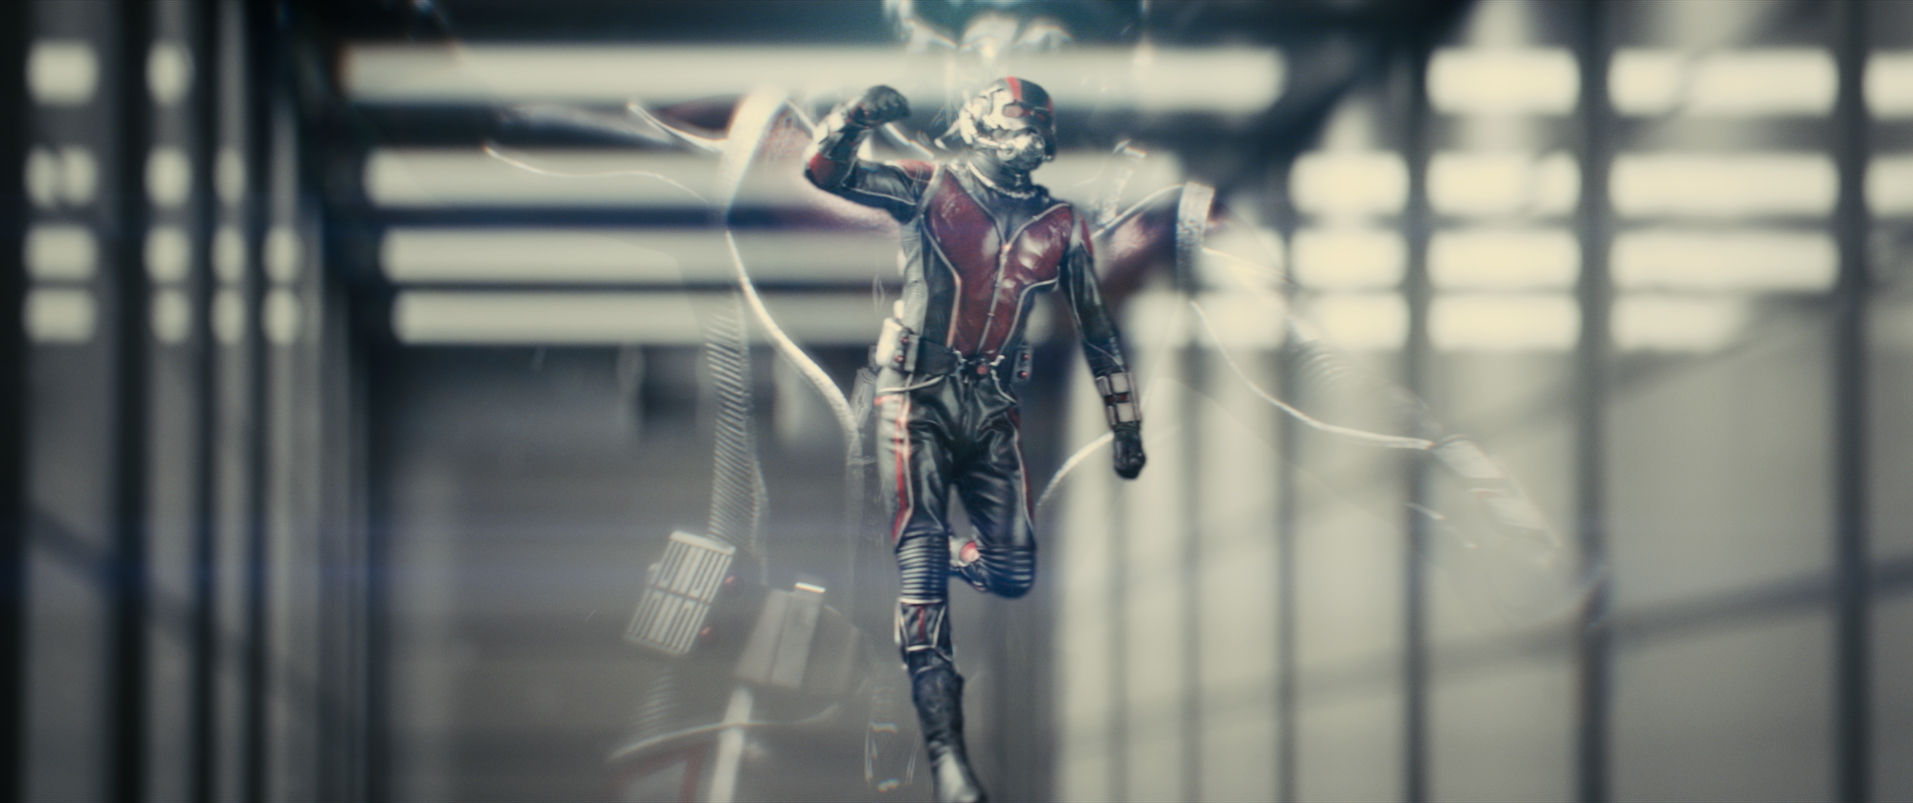 Ant Man (2015) Movie Story Summary & Review